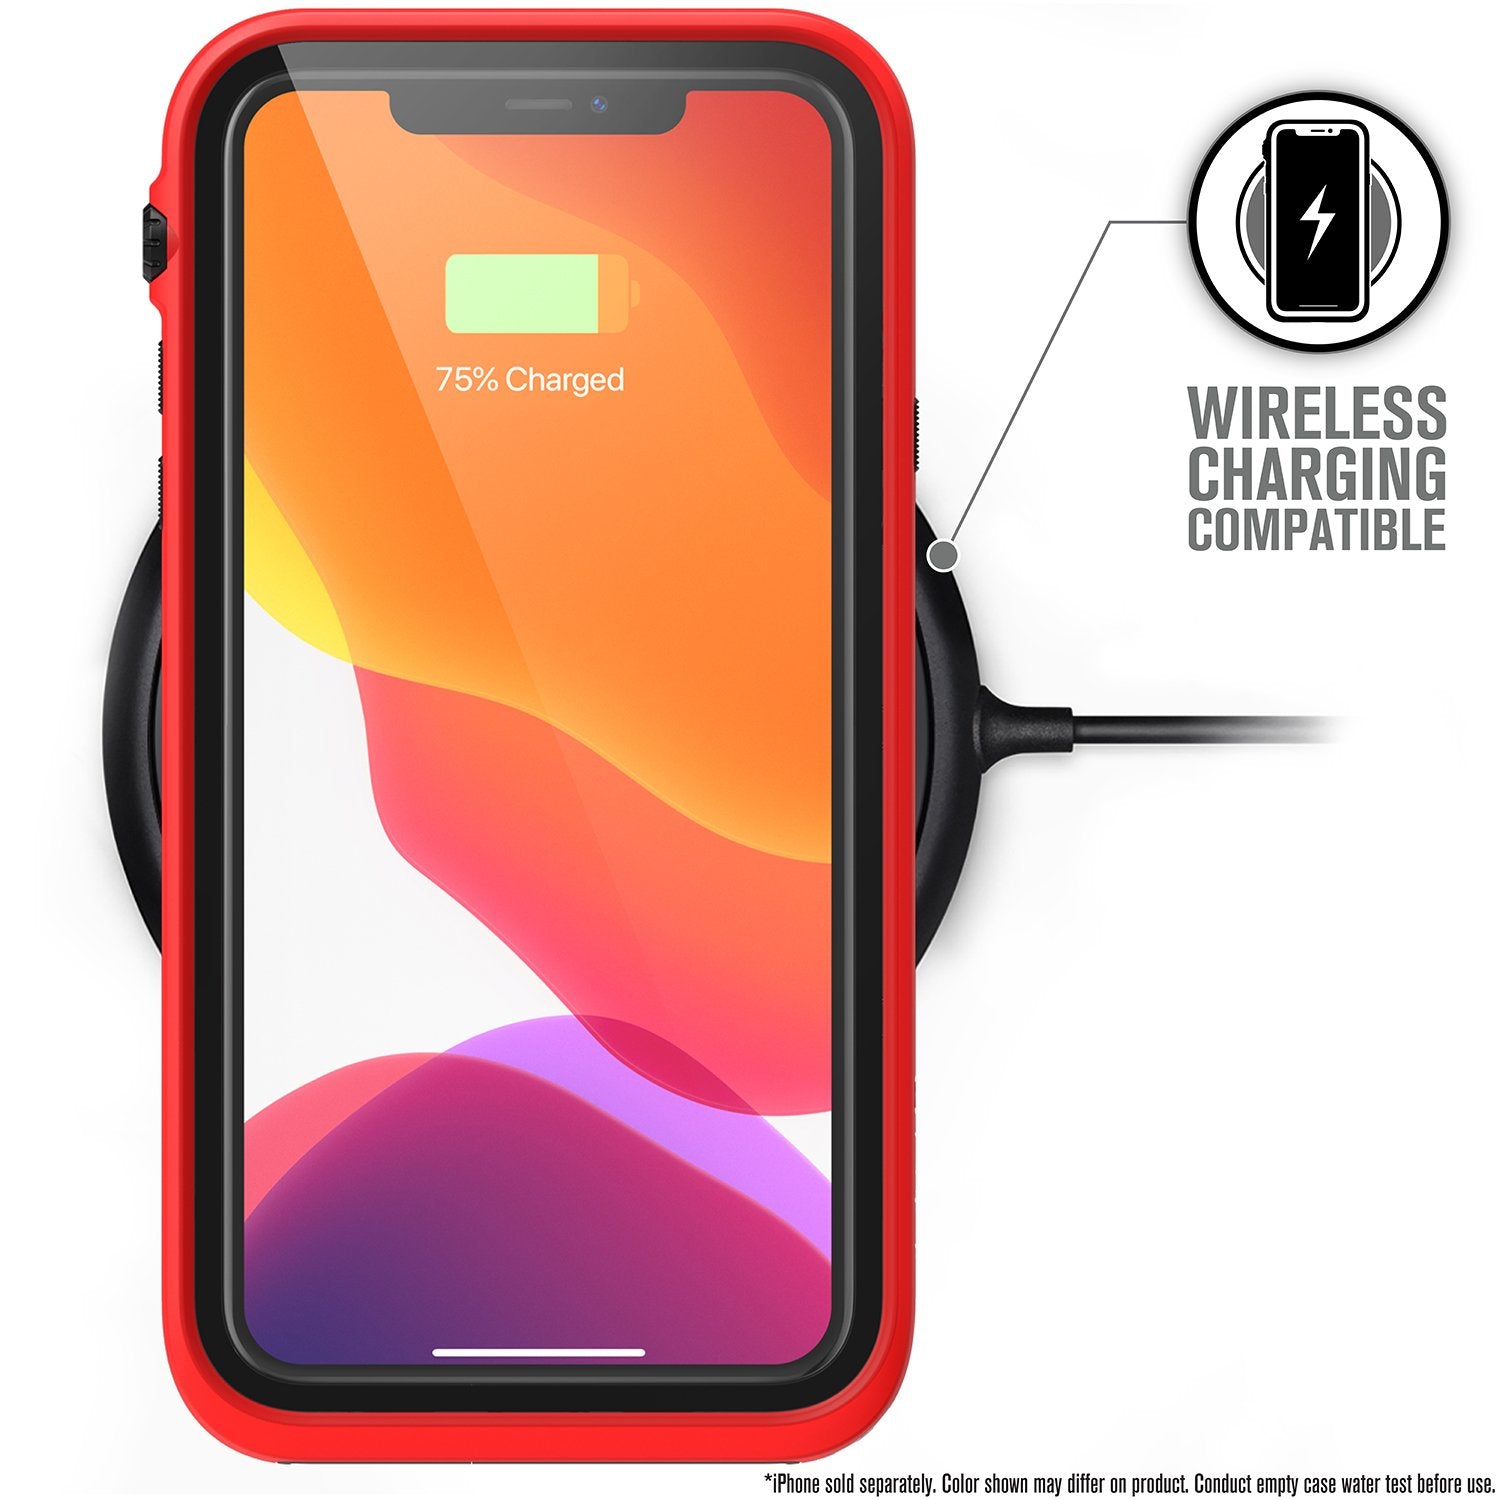 Catalyst iphone 11 pro max waterproof case showing the case wireless charging in flame red colorway